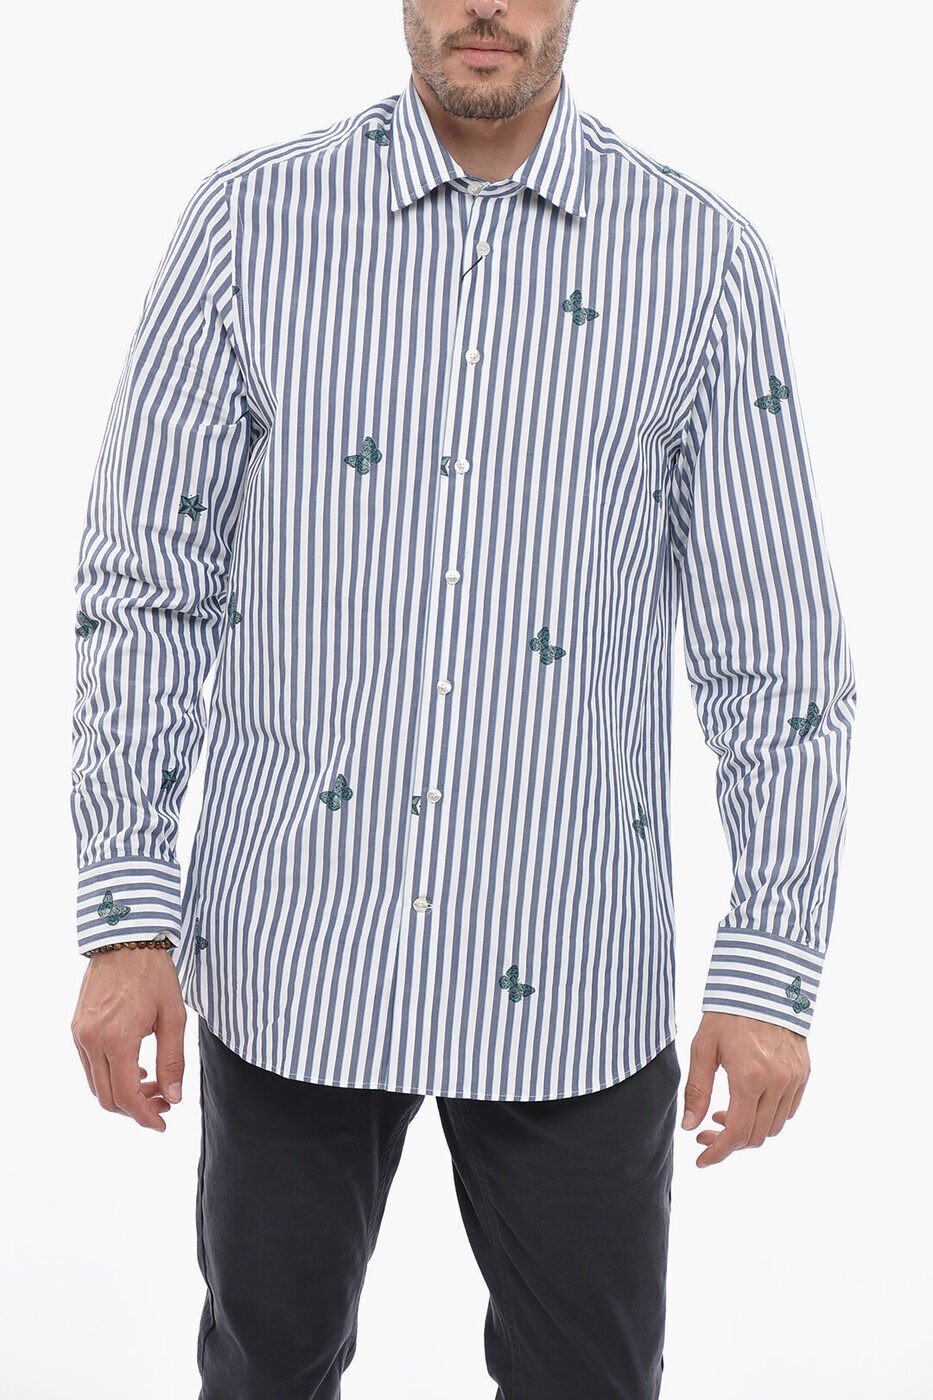 ETRO エトロ シャツ 12908 3215 200 メンズ TWO-TONE STRIPED SHIRT WITH BUTTERFLIES PRINT 【関税・送料無料】【ラッピング無料】 dk